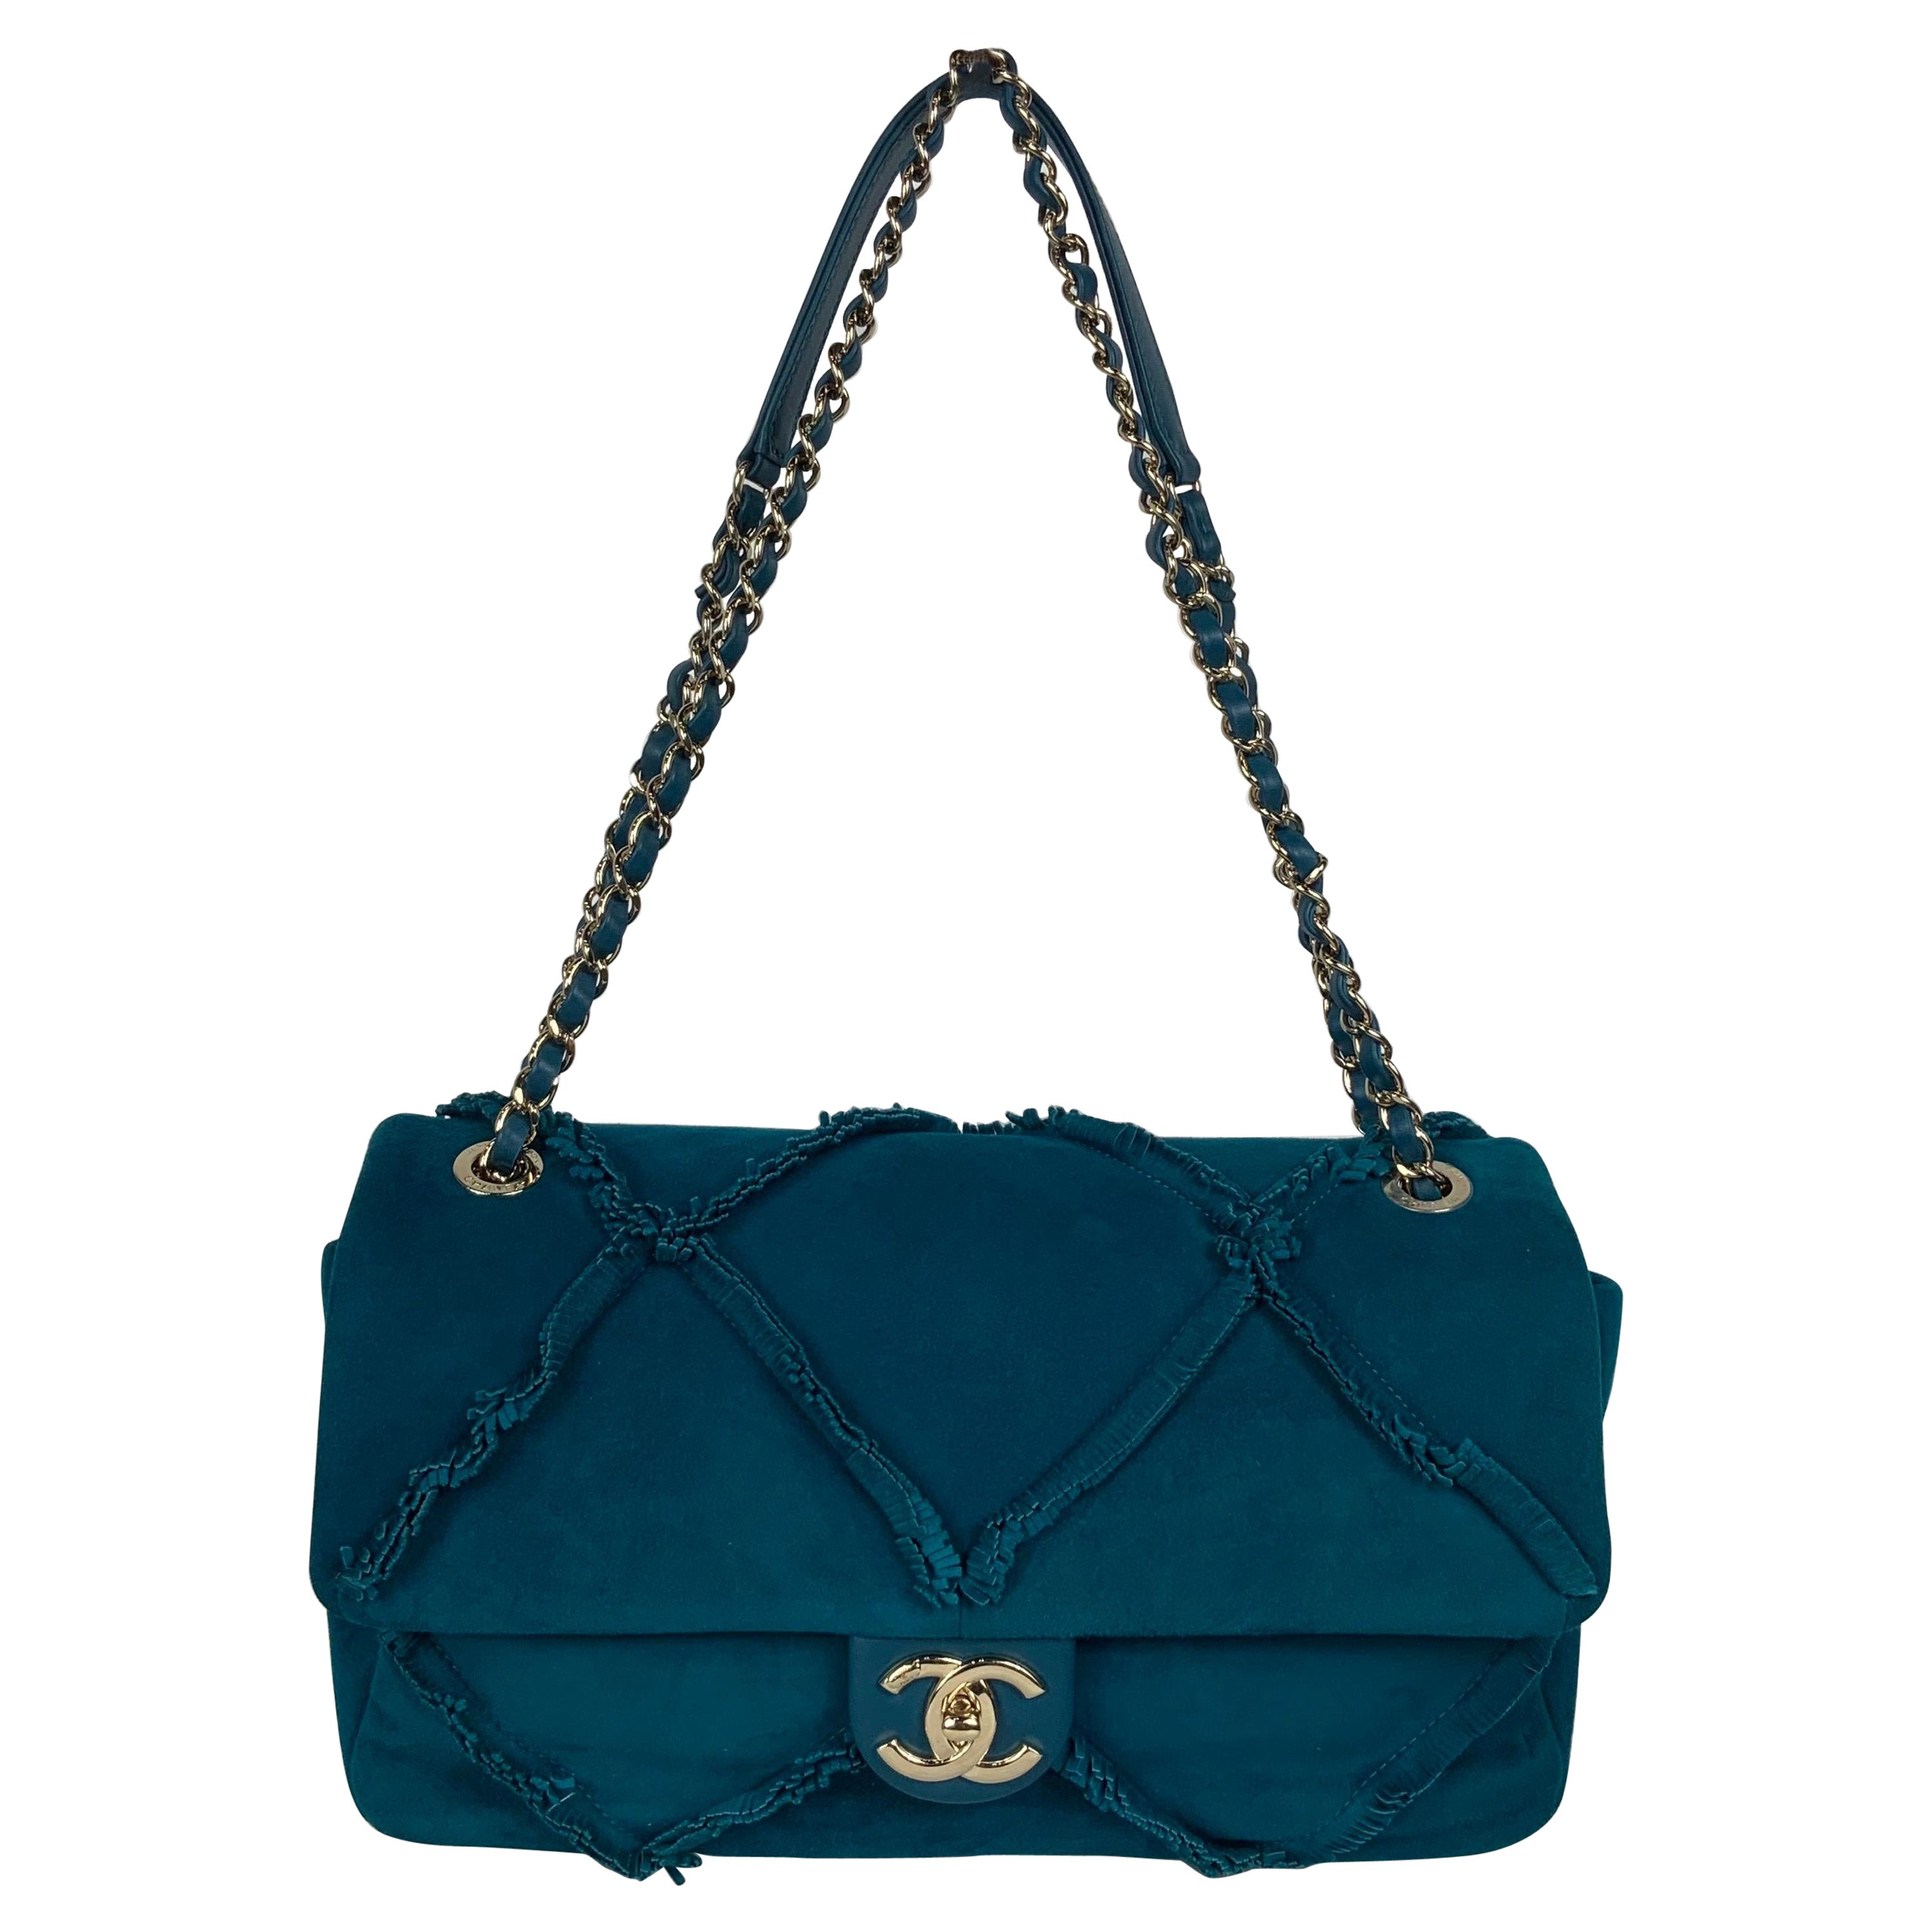 Chanel Suede Limited Edition Bag